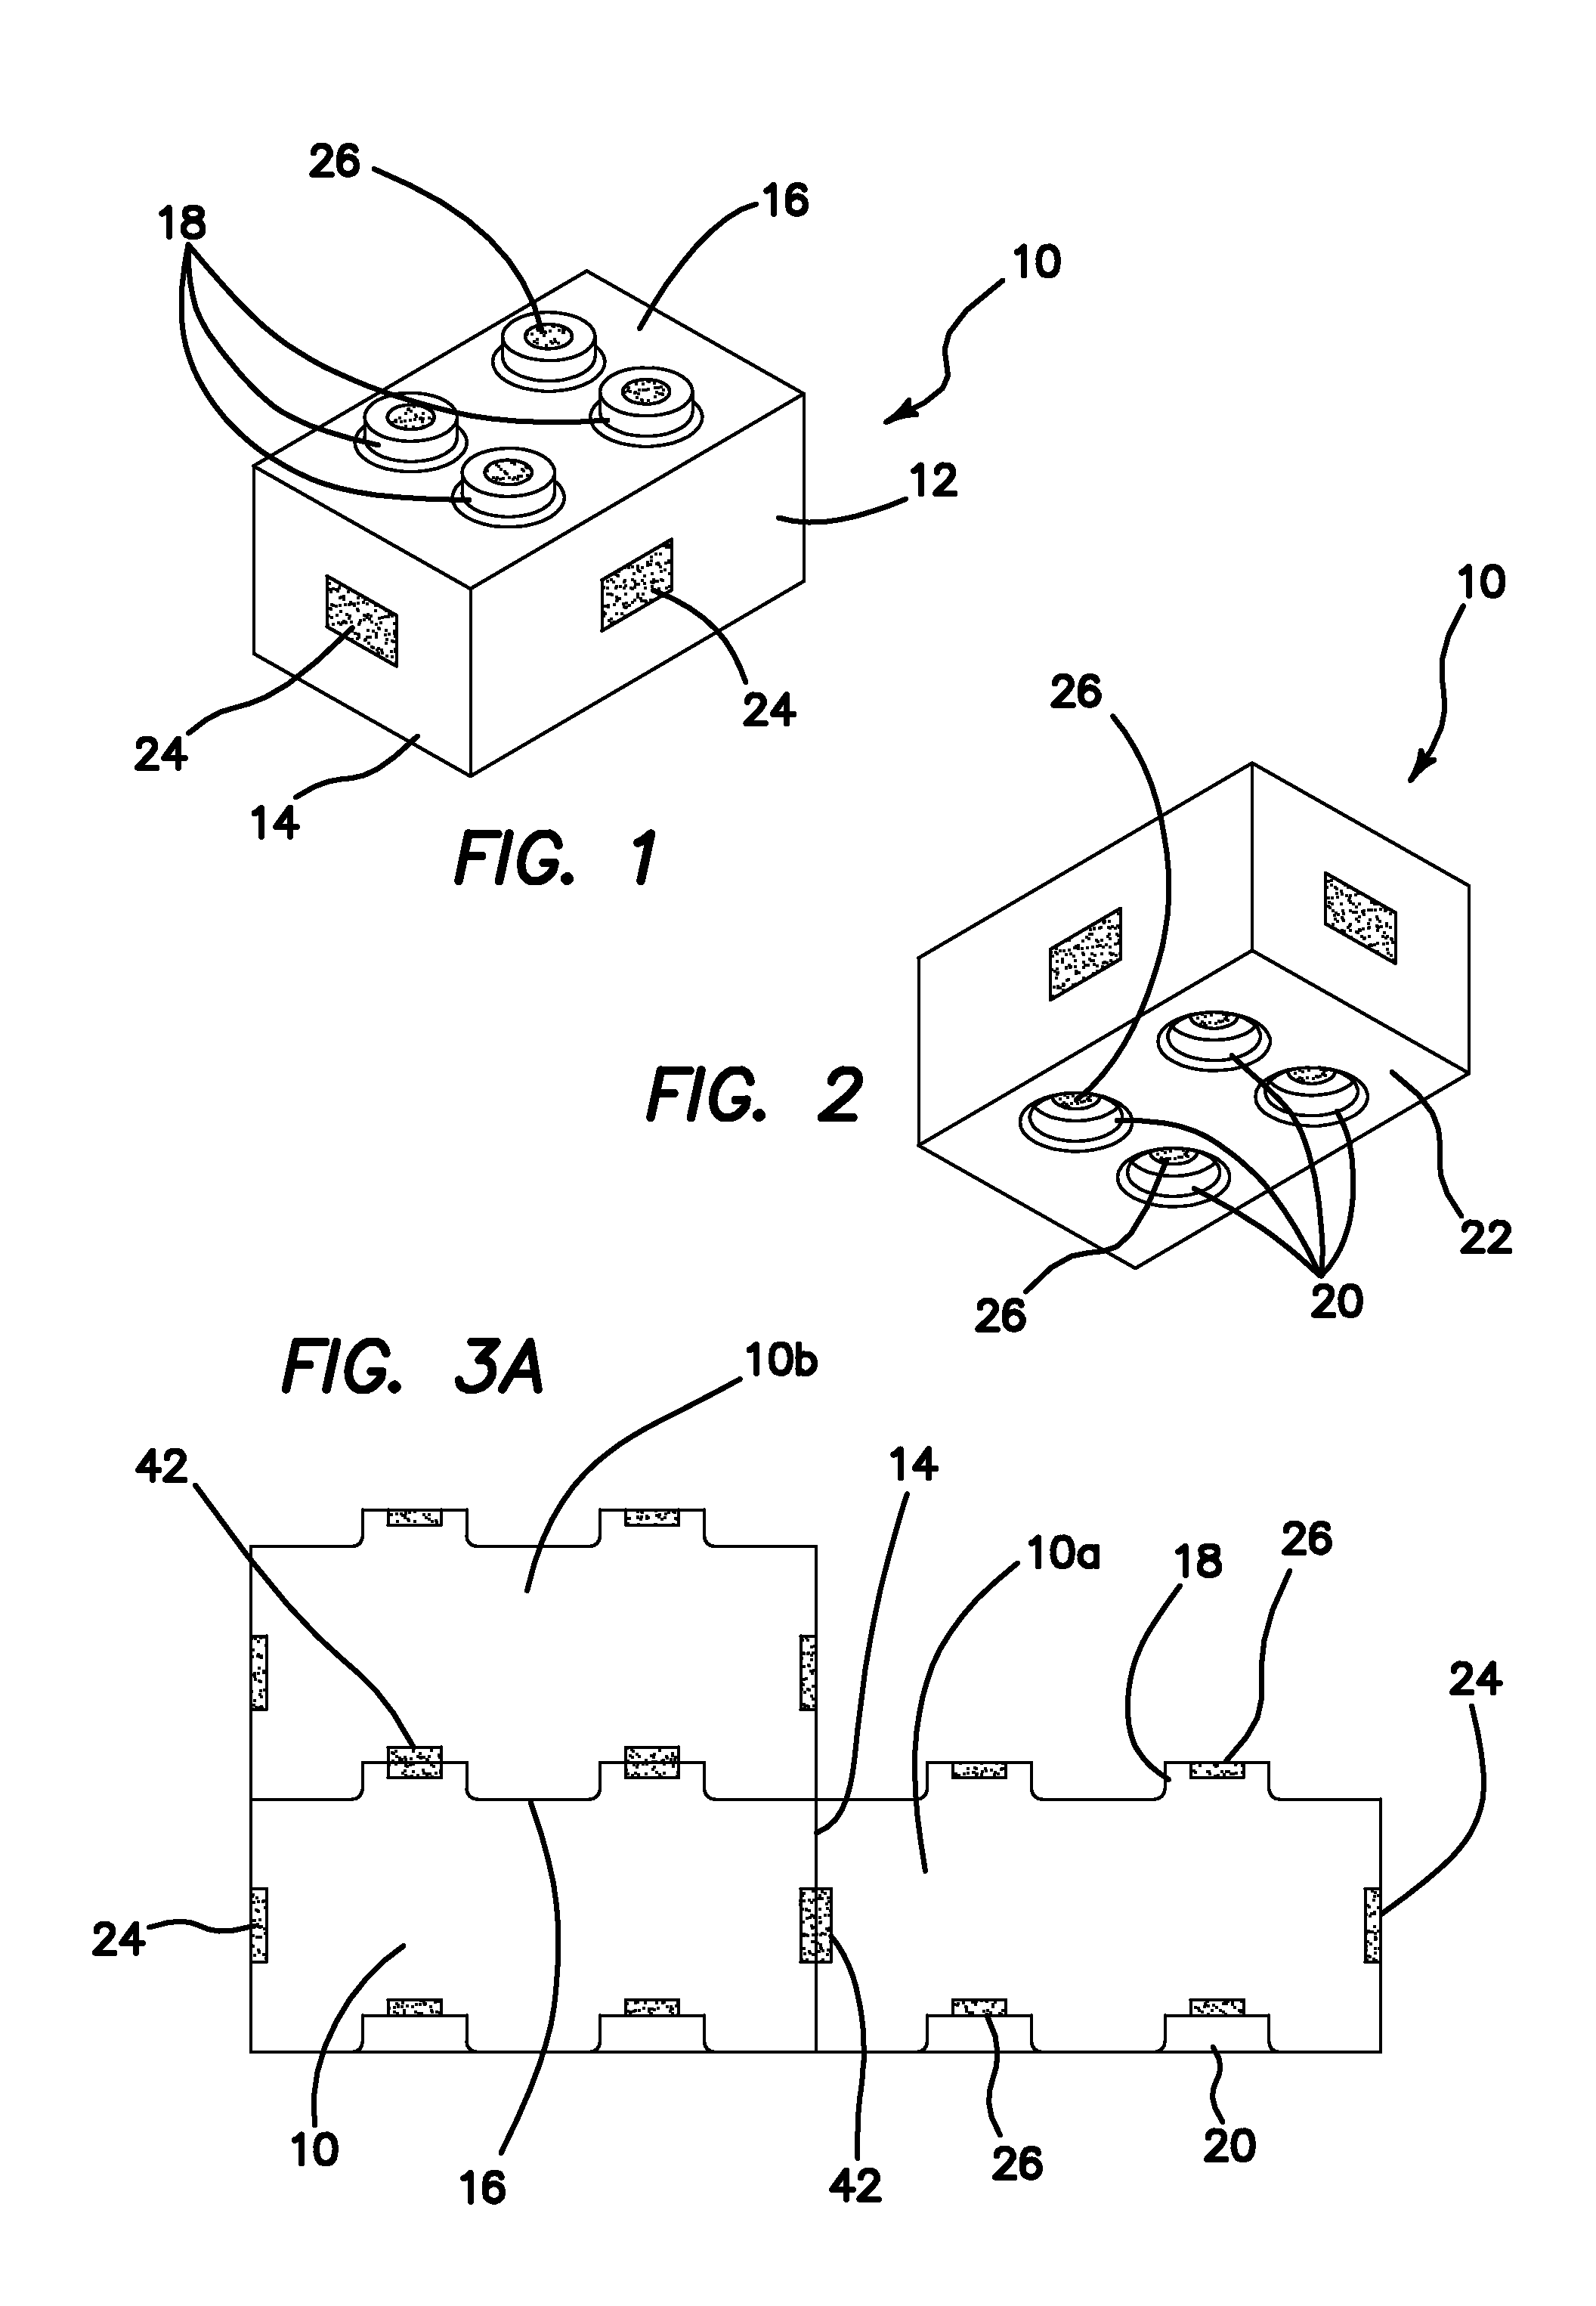 Apparatus and Method for Bonding Three Dimensional Construction Toys when Assembled